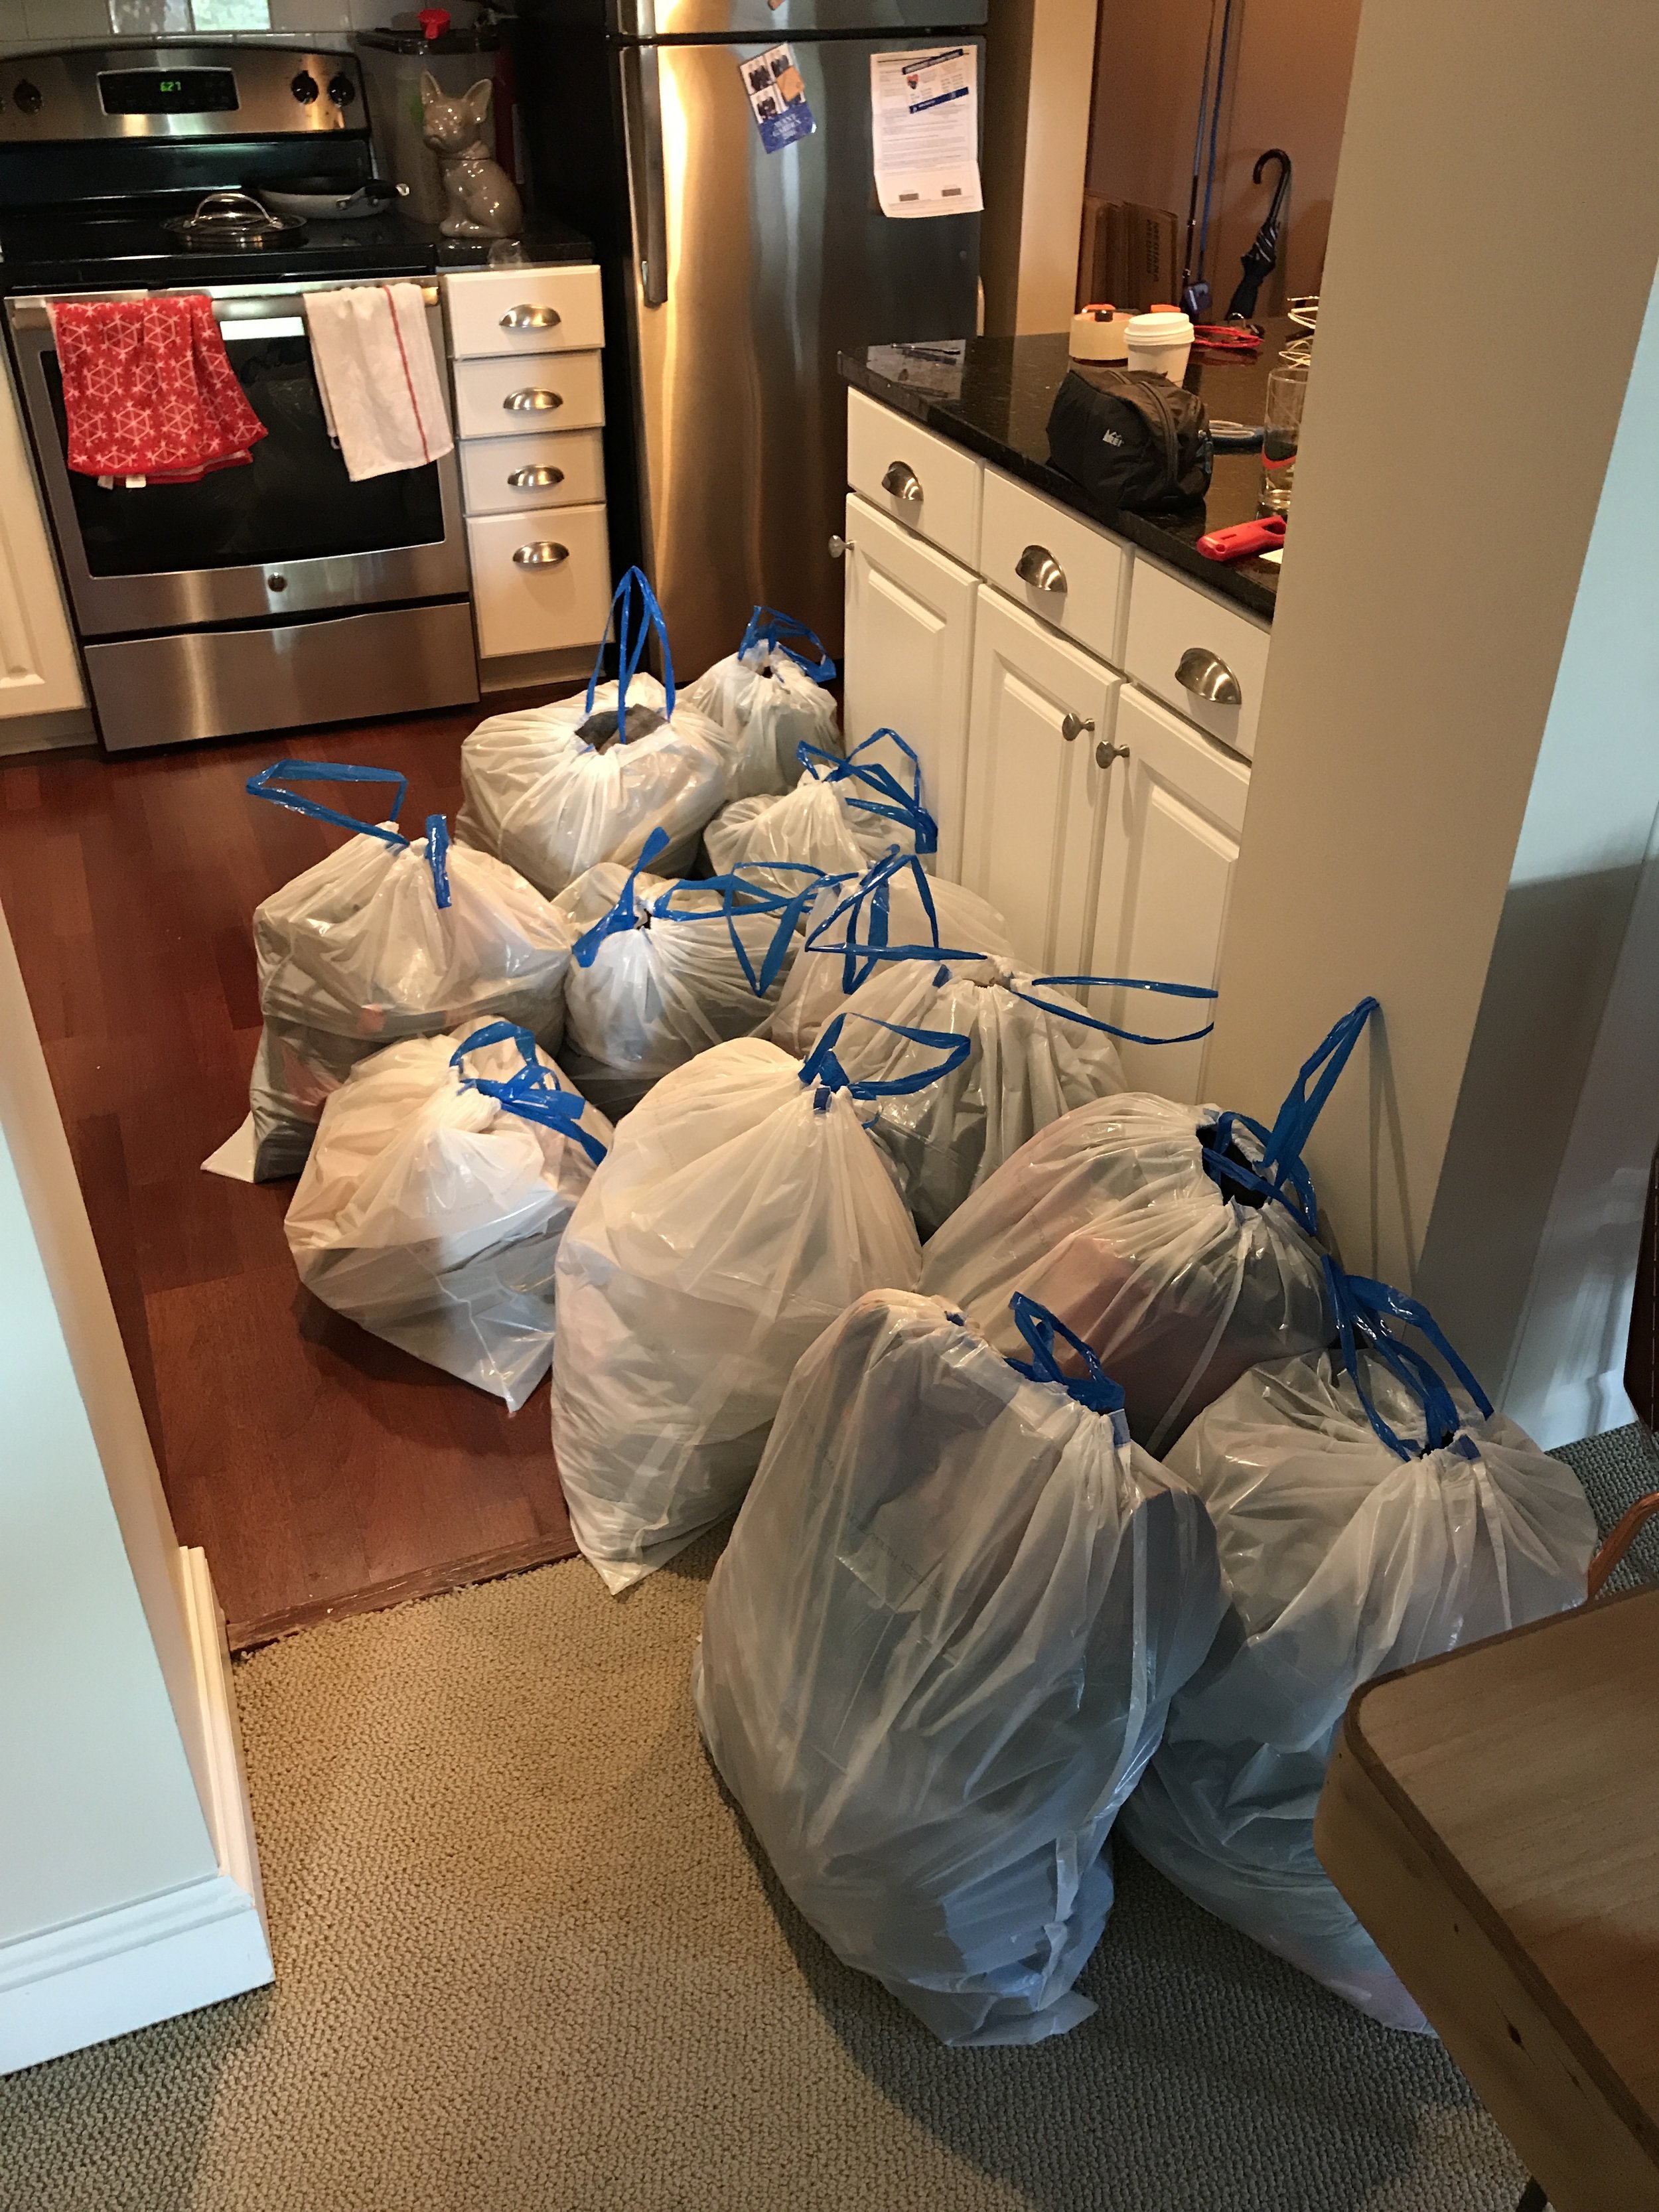 4 hours and 10 trash bags later my closet is clean/organized! Still have  the rest of the room to go but this feels like a great start. : r/hoarding